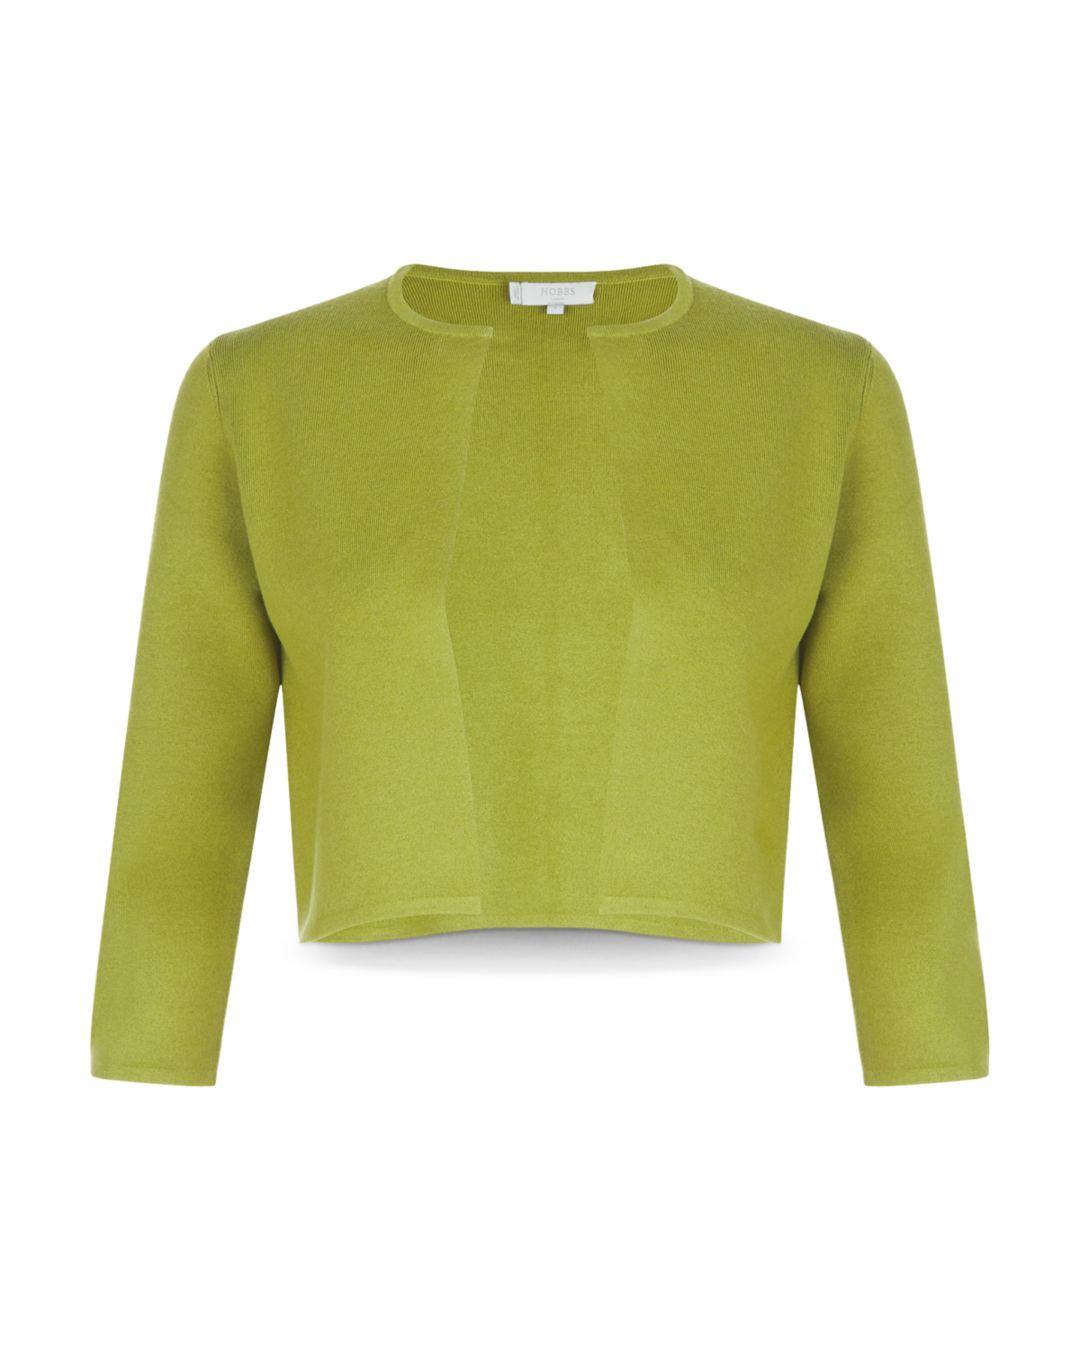 Hobbs Synthetic Ella Cropped Cardigan in Green - Lyst